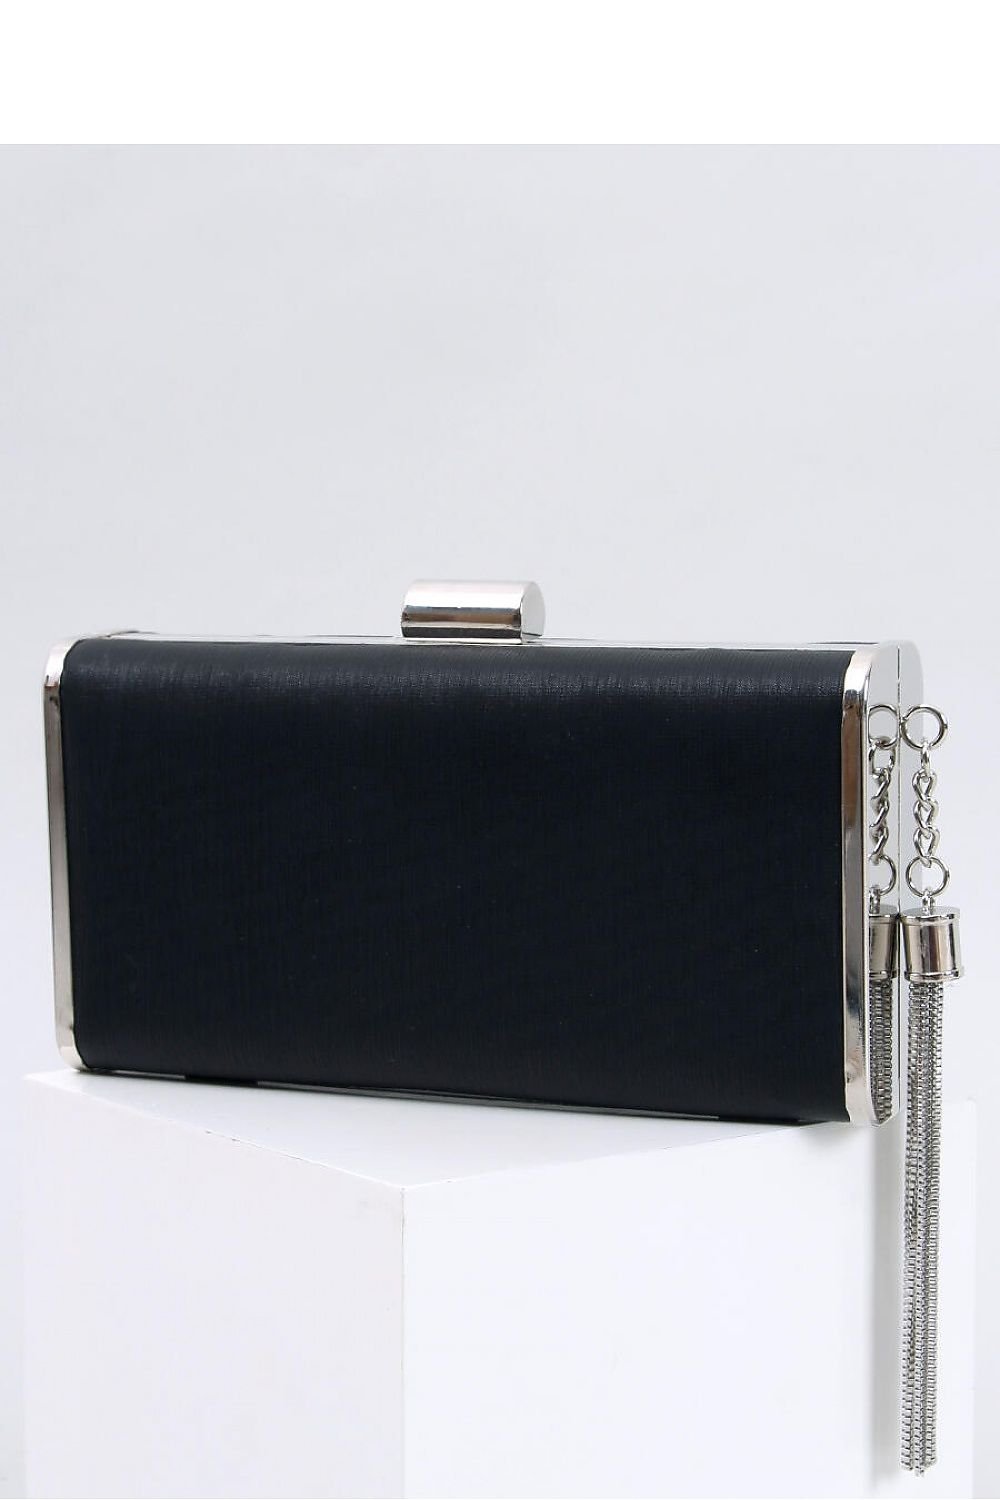 Envelope clutch bag - M&H FashionEnvelope clutch bagM&H FashionM&H Fashion189615_1103873one-size-fits-allEnvelope clutch bag InelloM&H FashionM&H FashionVisitor clutch bag for women with a tassel. This unique model with an iridescent finish is sure to catch the eye.... The handbag can be carried in hand or on a delicEnvelope clutch bag